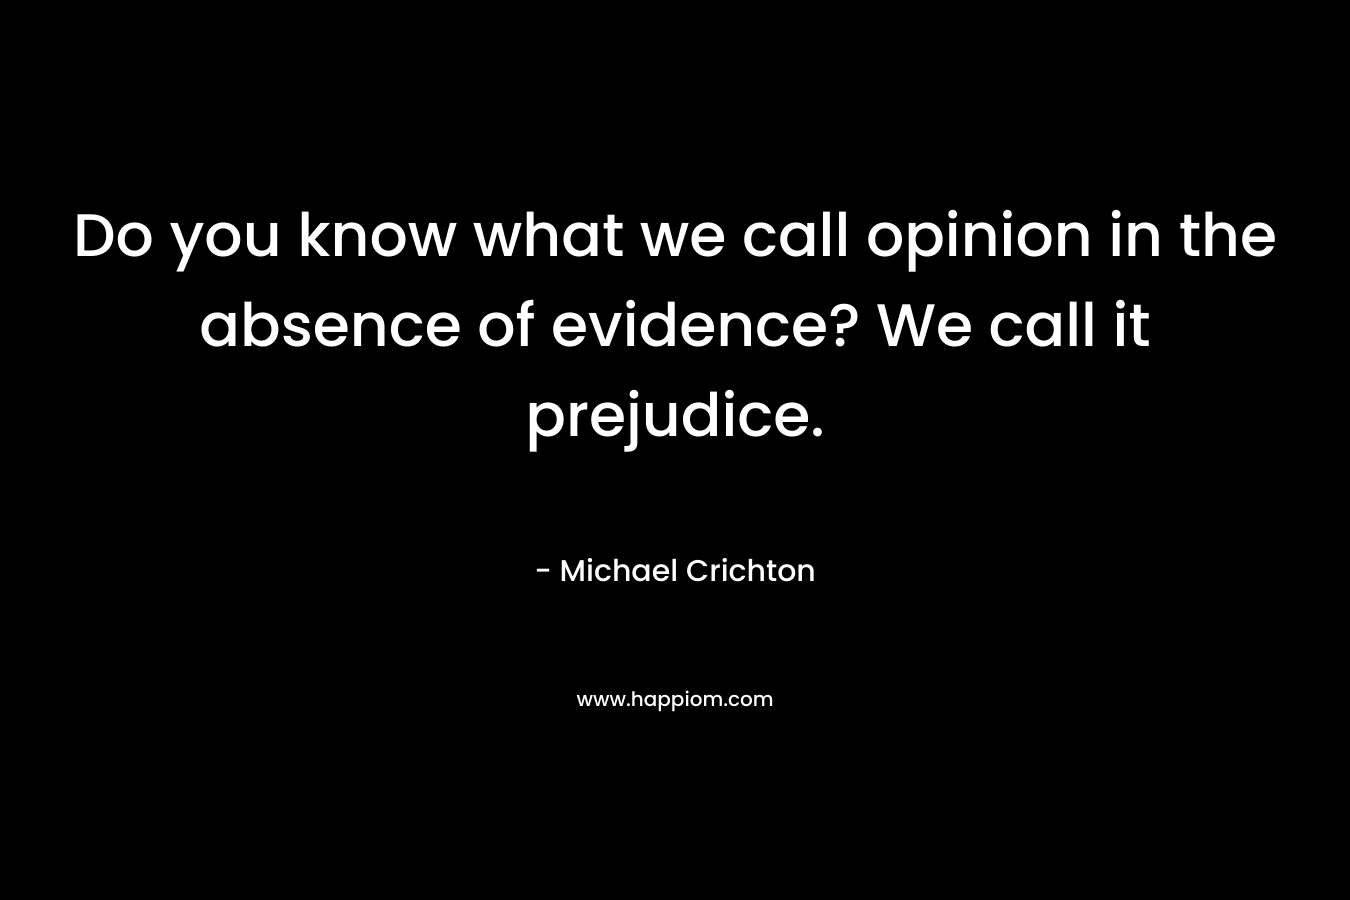 Do you know what we call opinion in the absence of evidence? We call it prejudice.